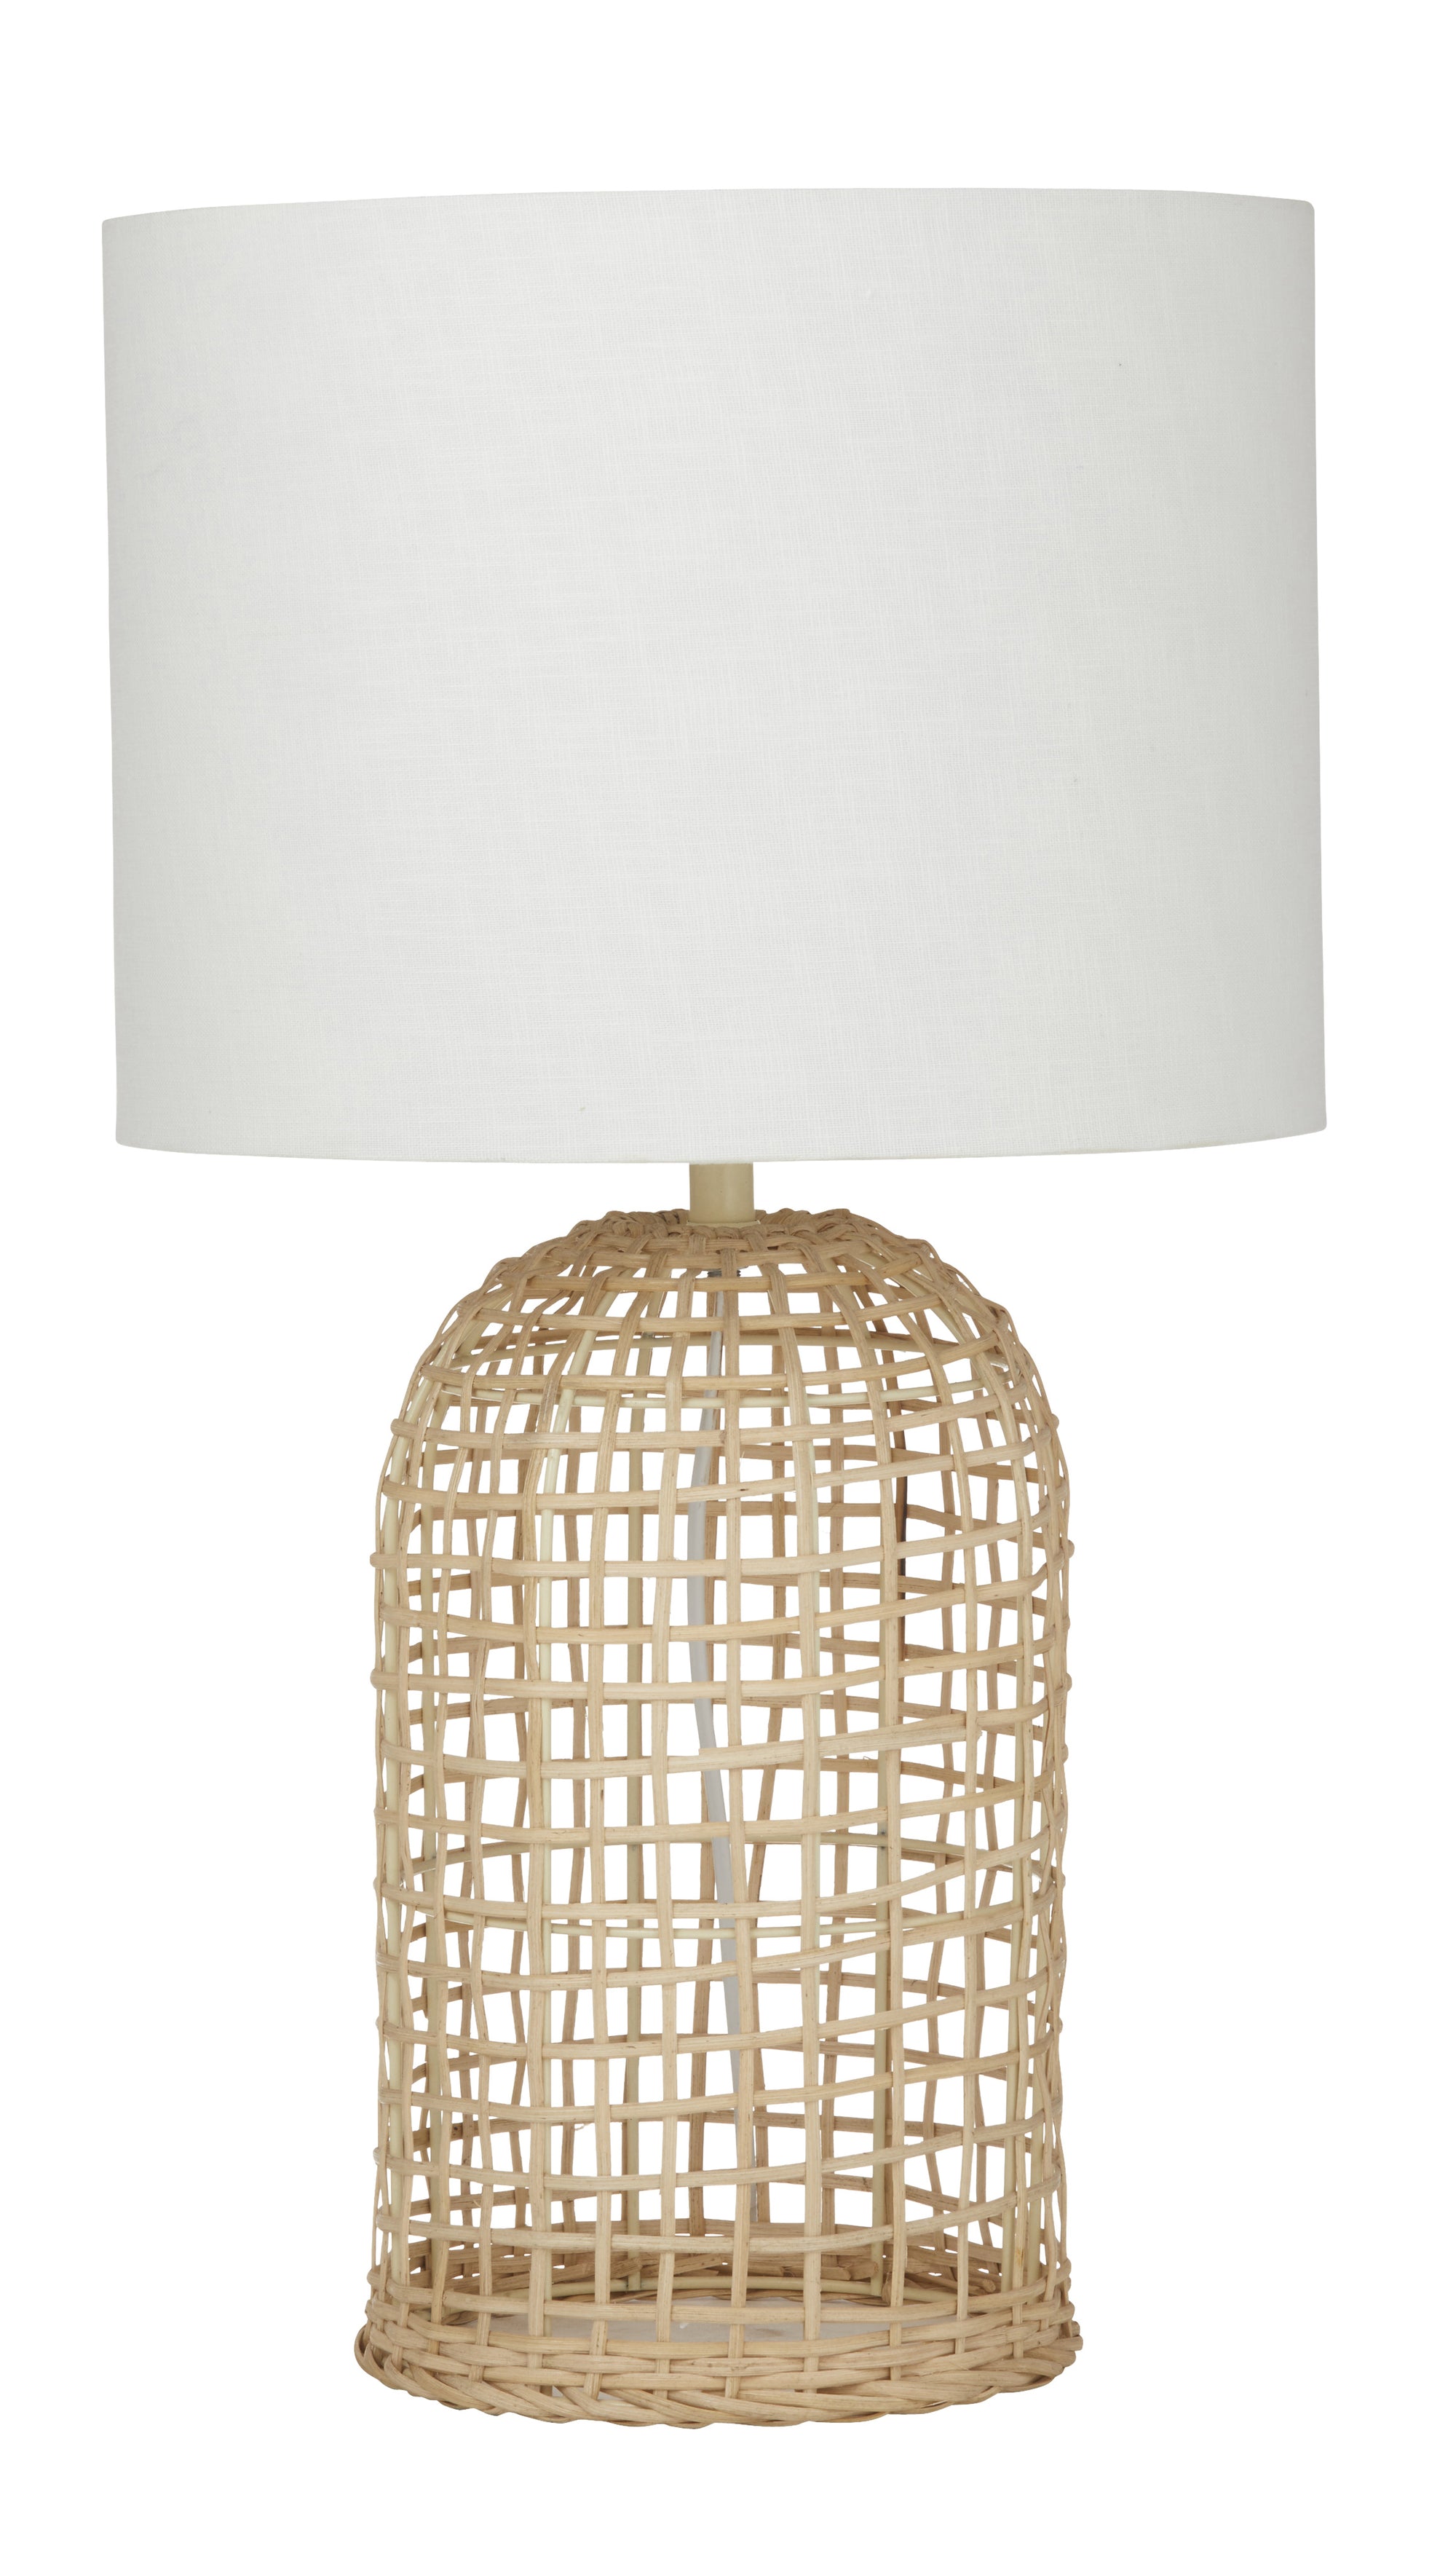 Lamp with White lamp shade and rattan base 